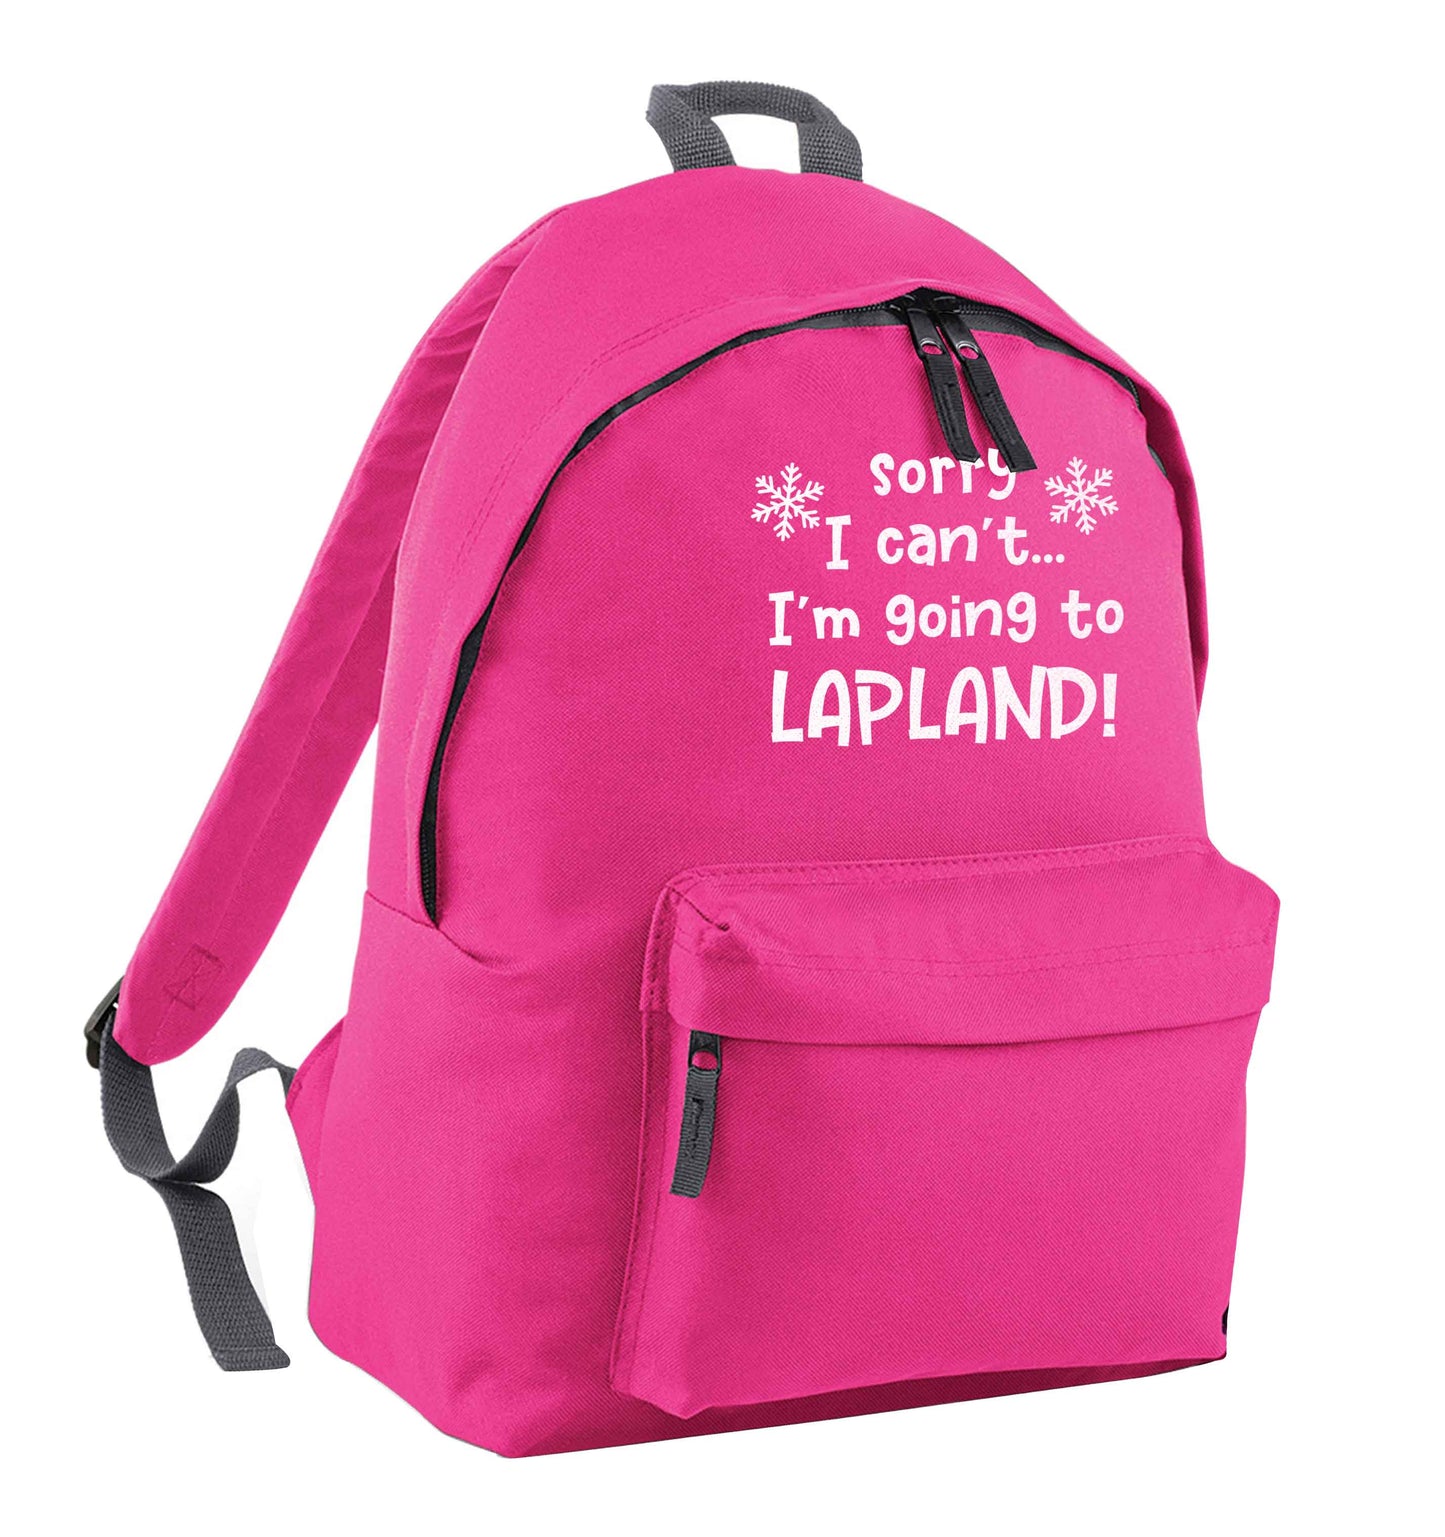 Sorry I can't I'm going to Lapland pink children's backpack